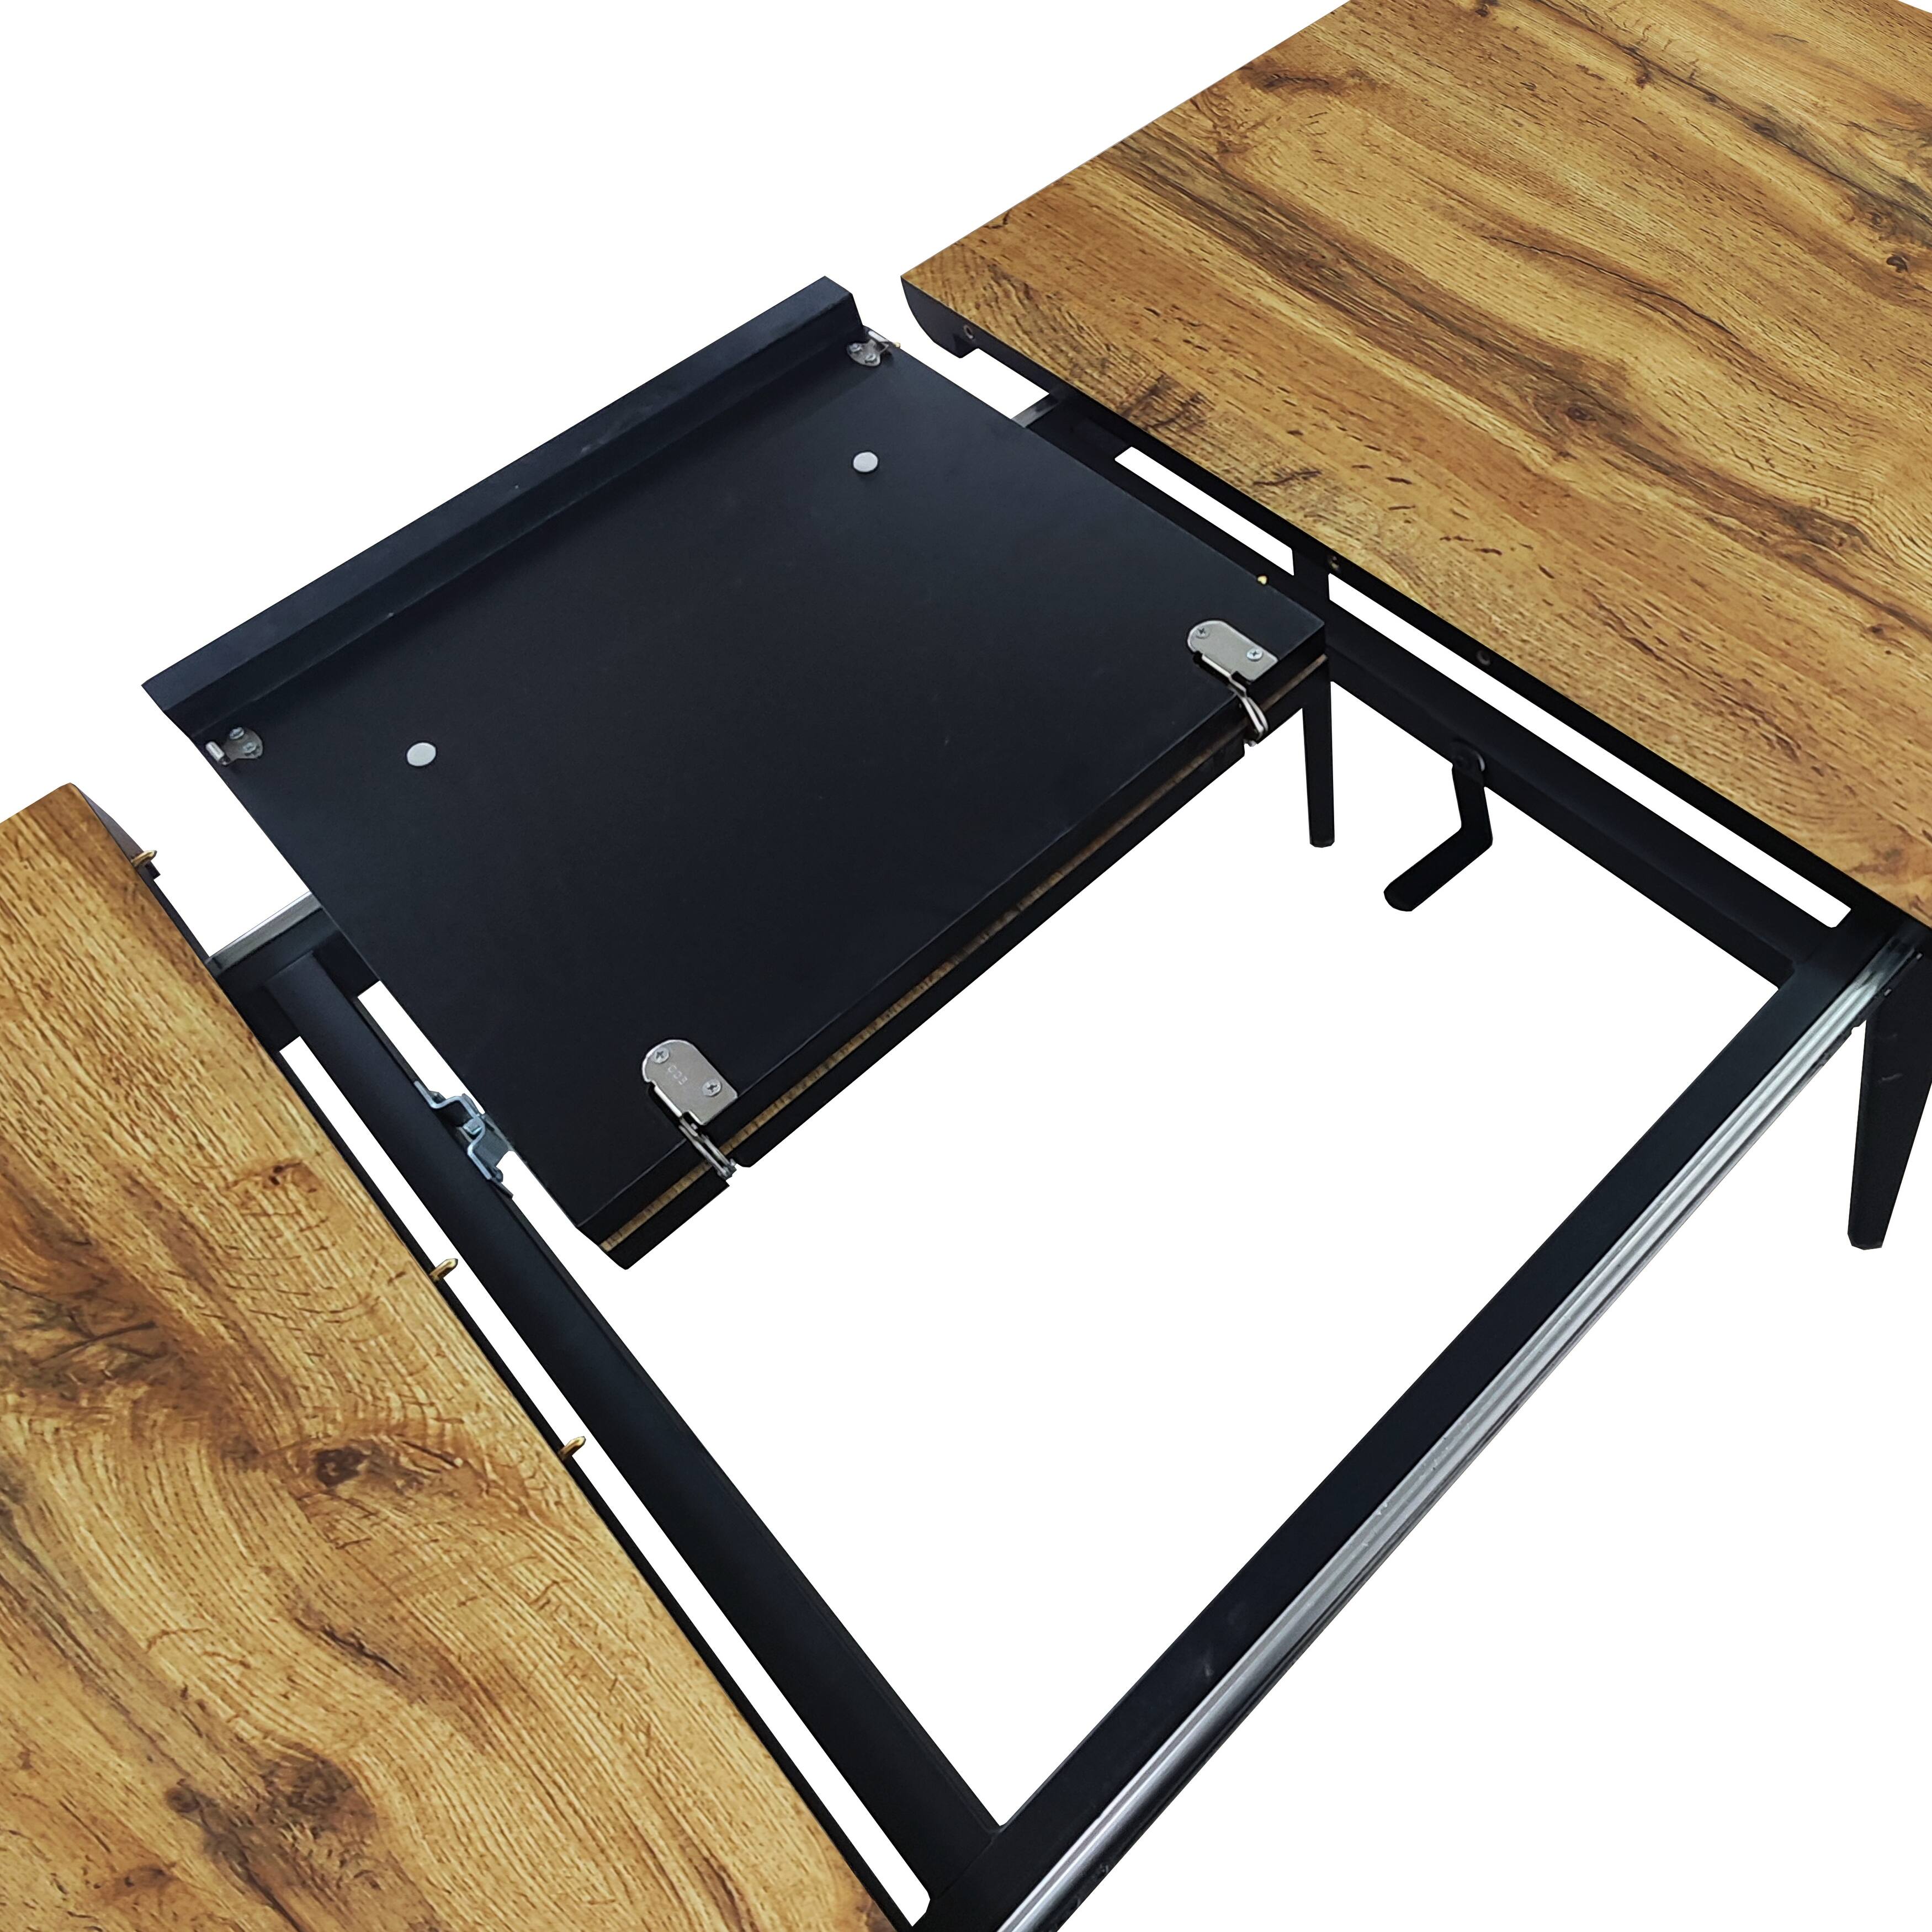 Square Functional Dining Table Breakfast Nook with Steel legs